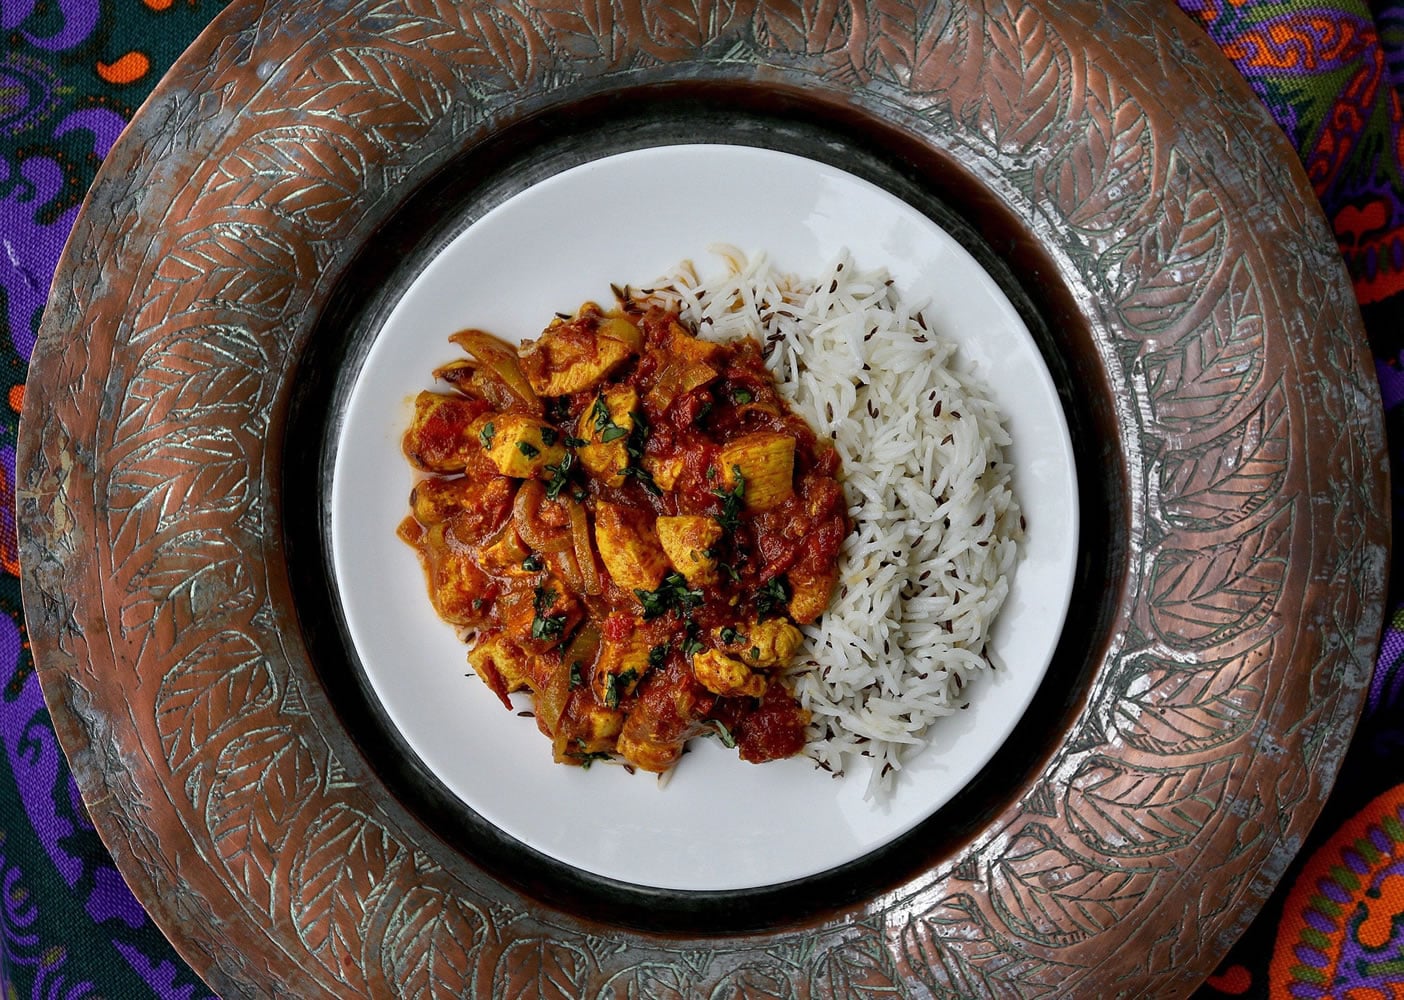 Chicken Tikka Masala with a side of Caraway Rice (Patrick Farrell/Miami Herald)